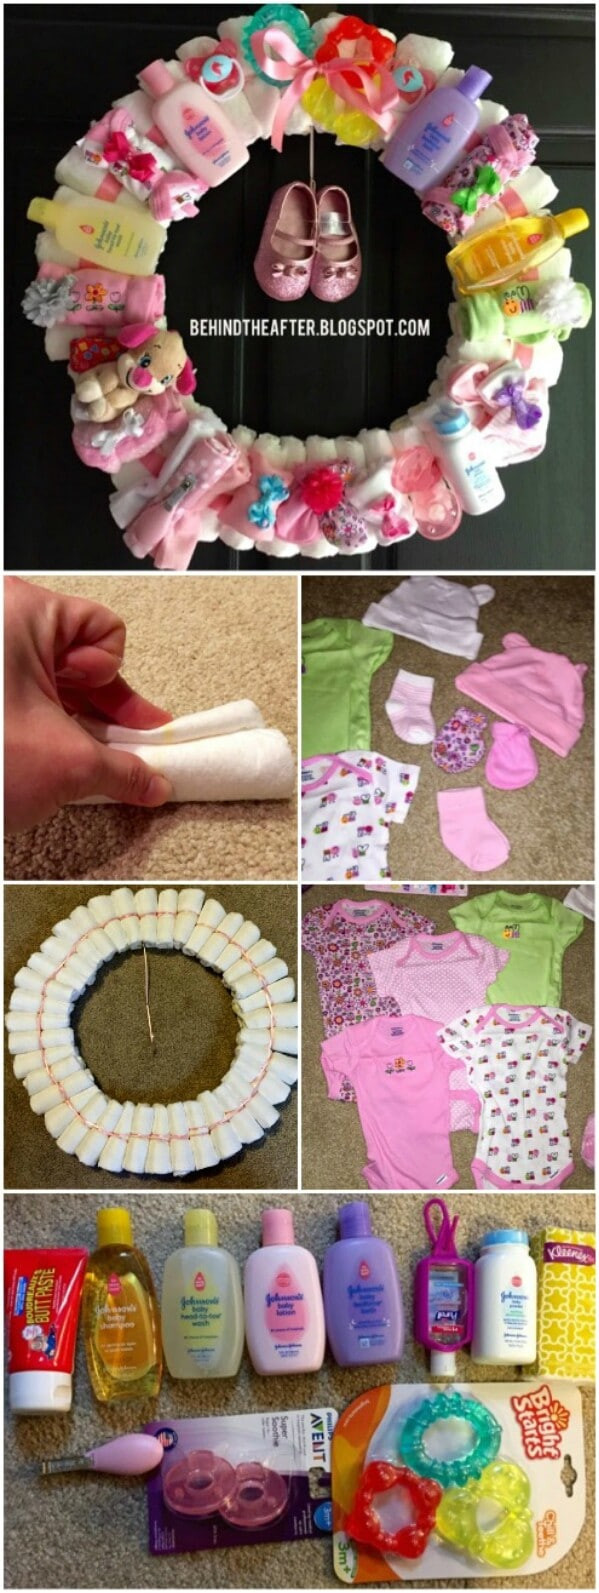 Baby Shower Diy Gift Ideas
 25 Enchantingly Adorable Baby Shower Gift Ideas That Will